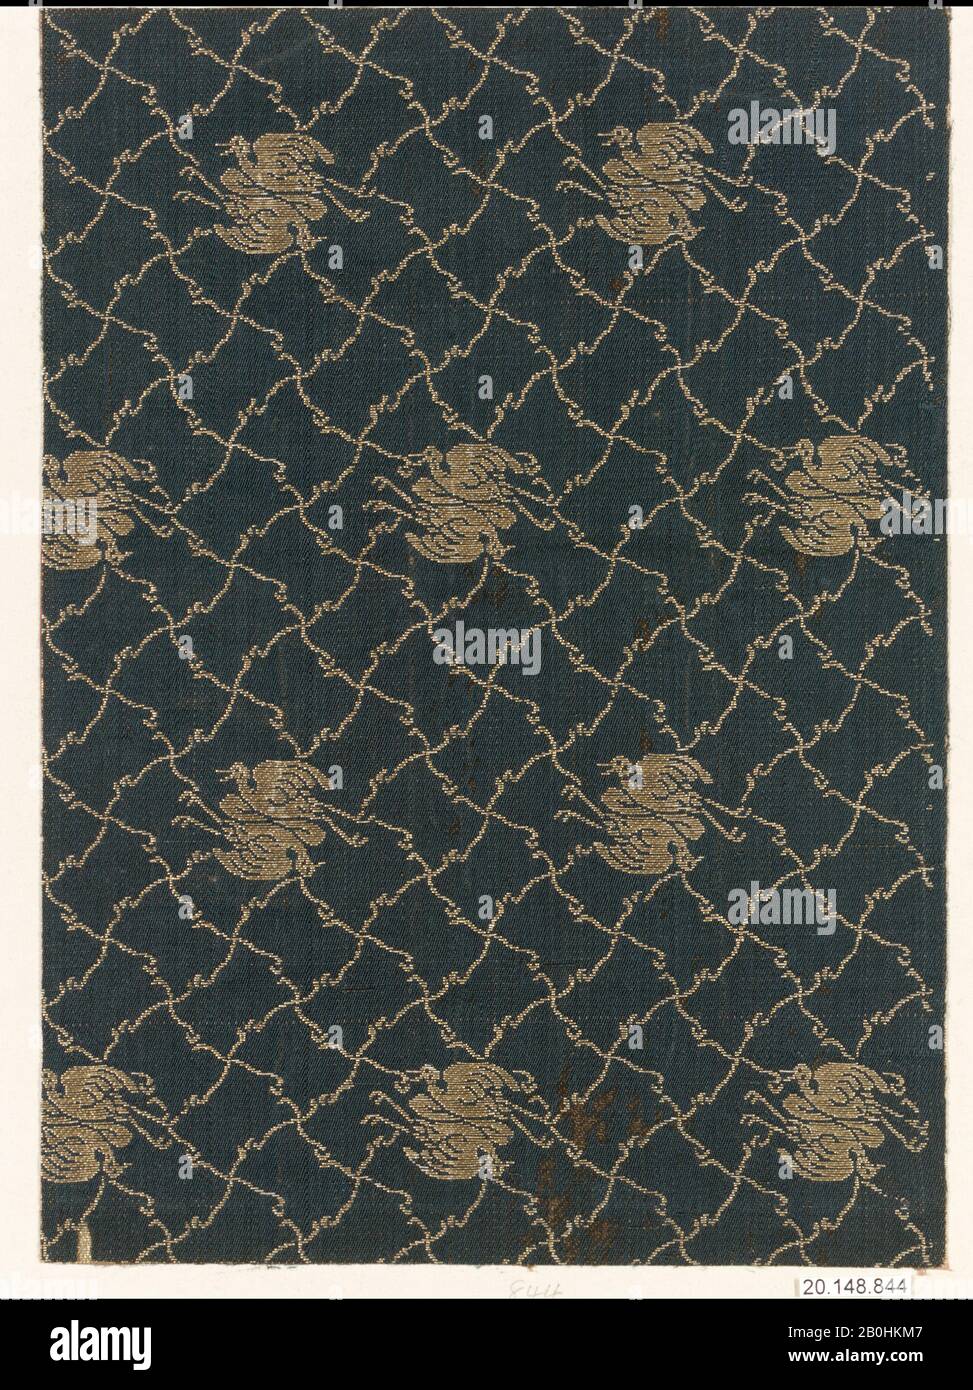 Piece, Japan, 17th century, Japan, Silk, Compound weave, 9 1/4 × 6 5/8 in. (23.5 × 16.8 cm), Textiles-Woven Stock Photo